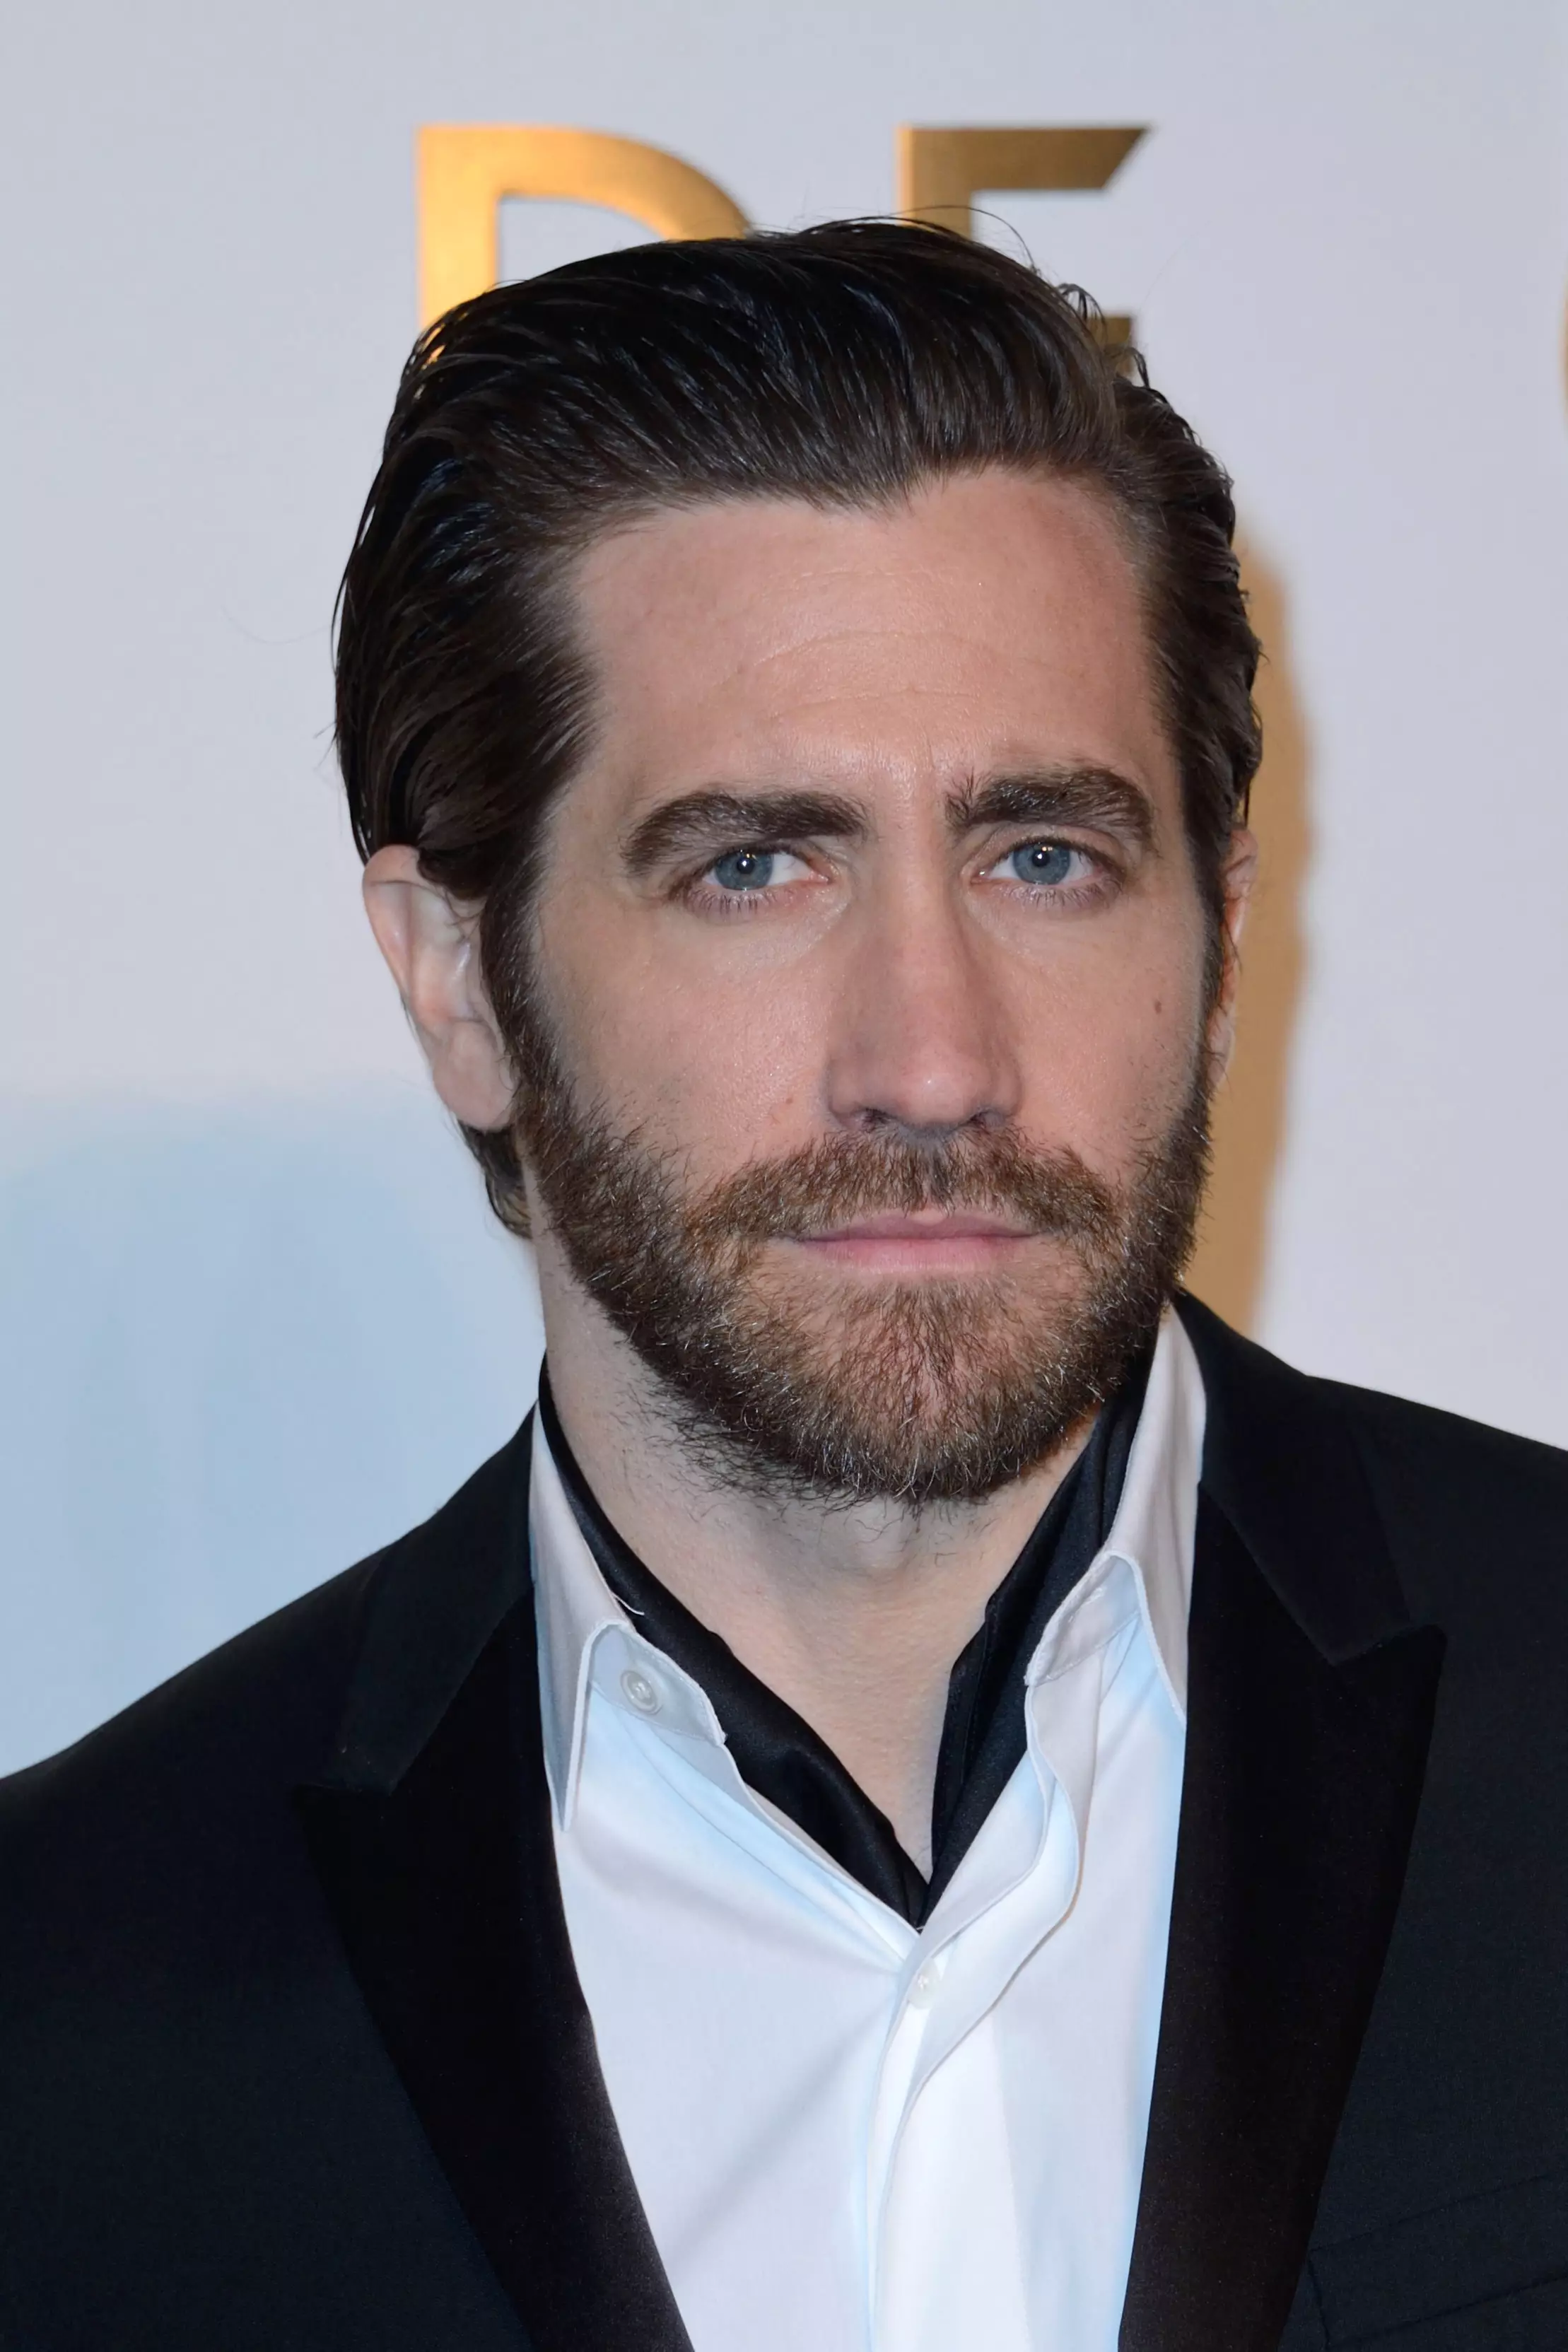 Jake Gyllenhaal takes on the role of Mysterio.